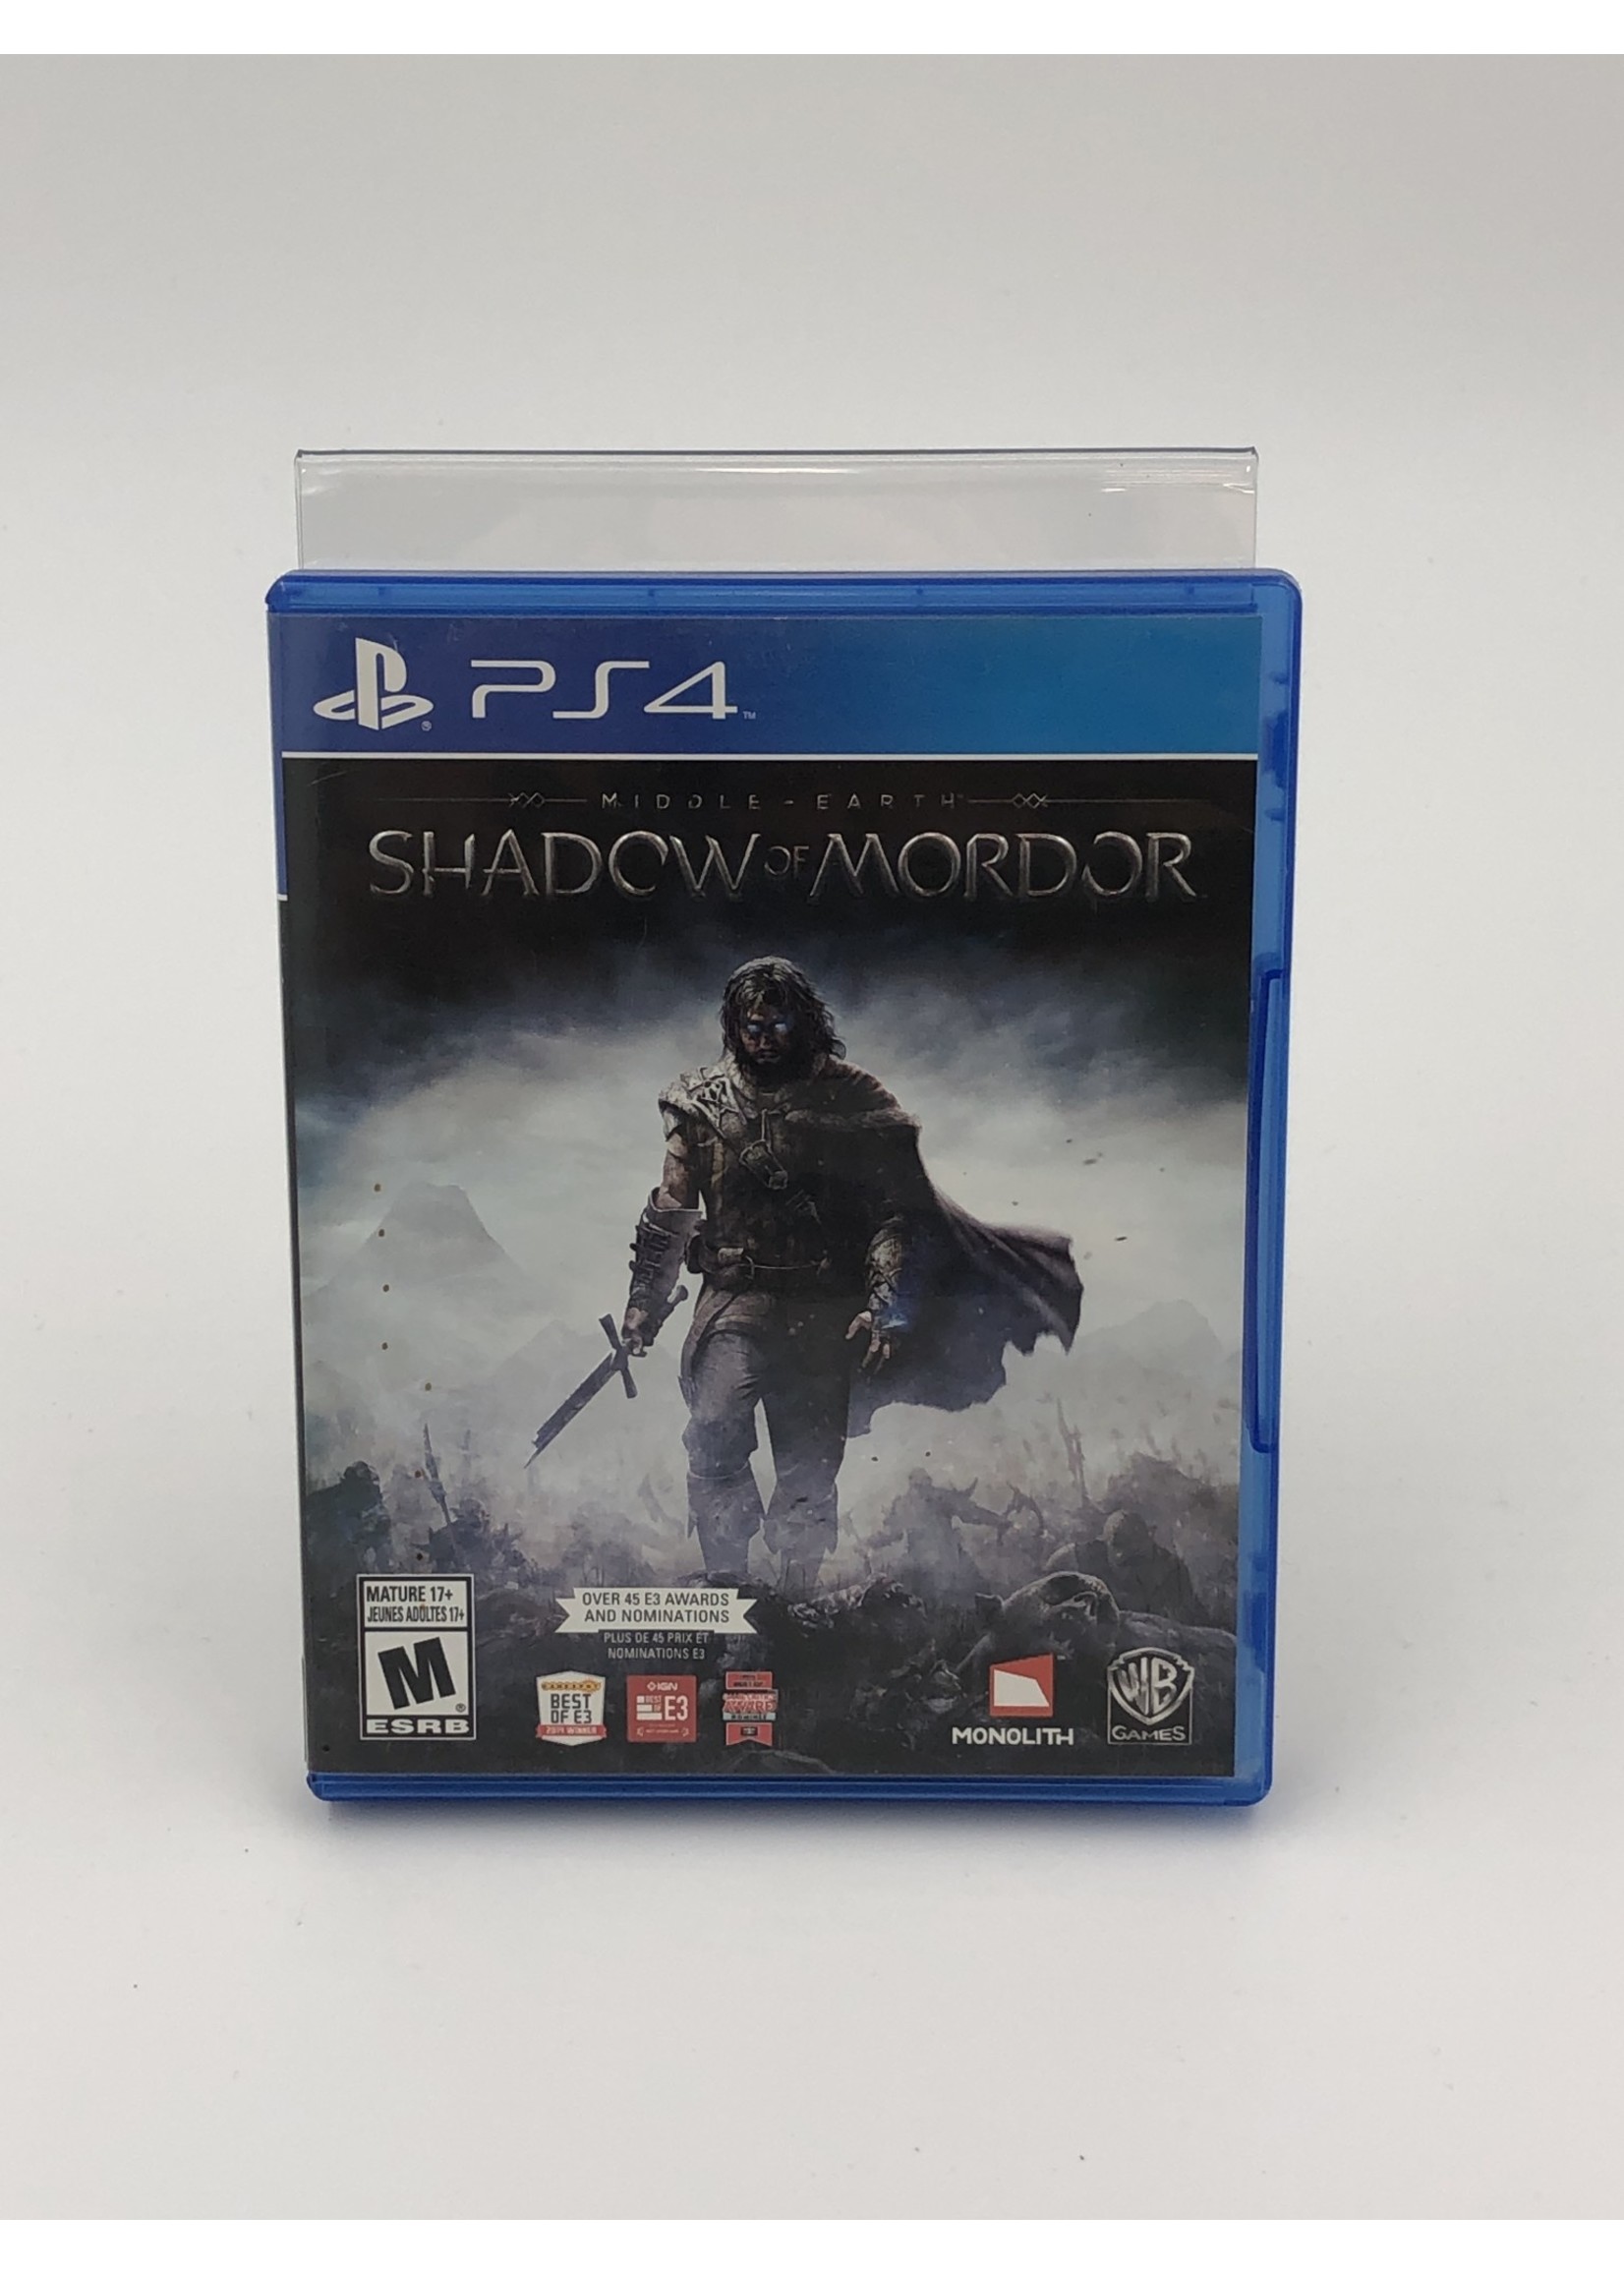 Sony Middle Earth: Shadow of Mordor - PS4